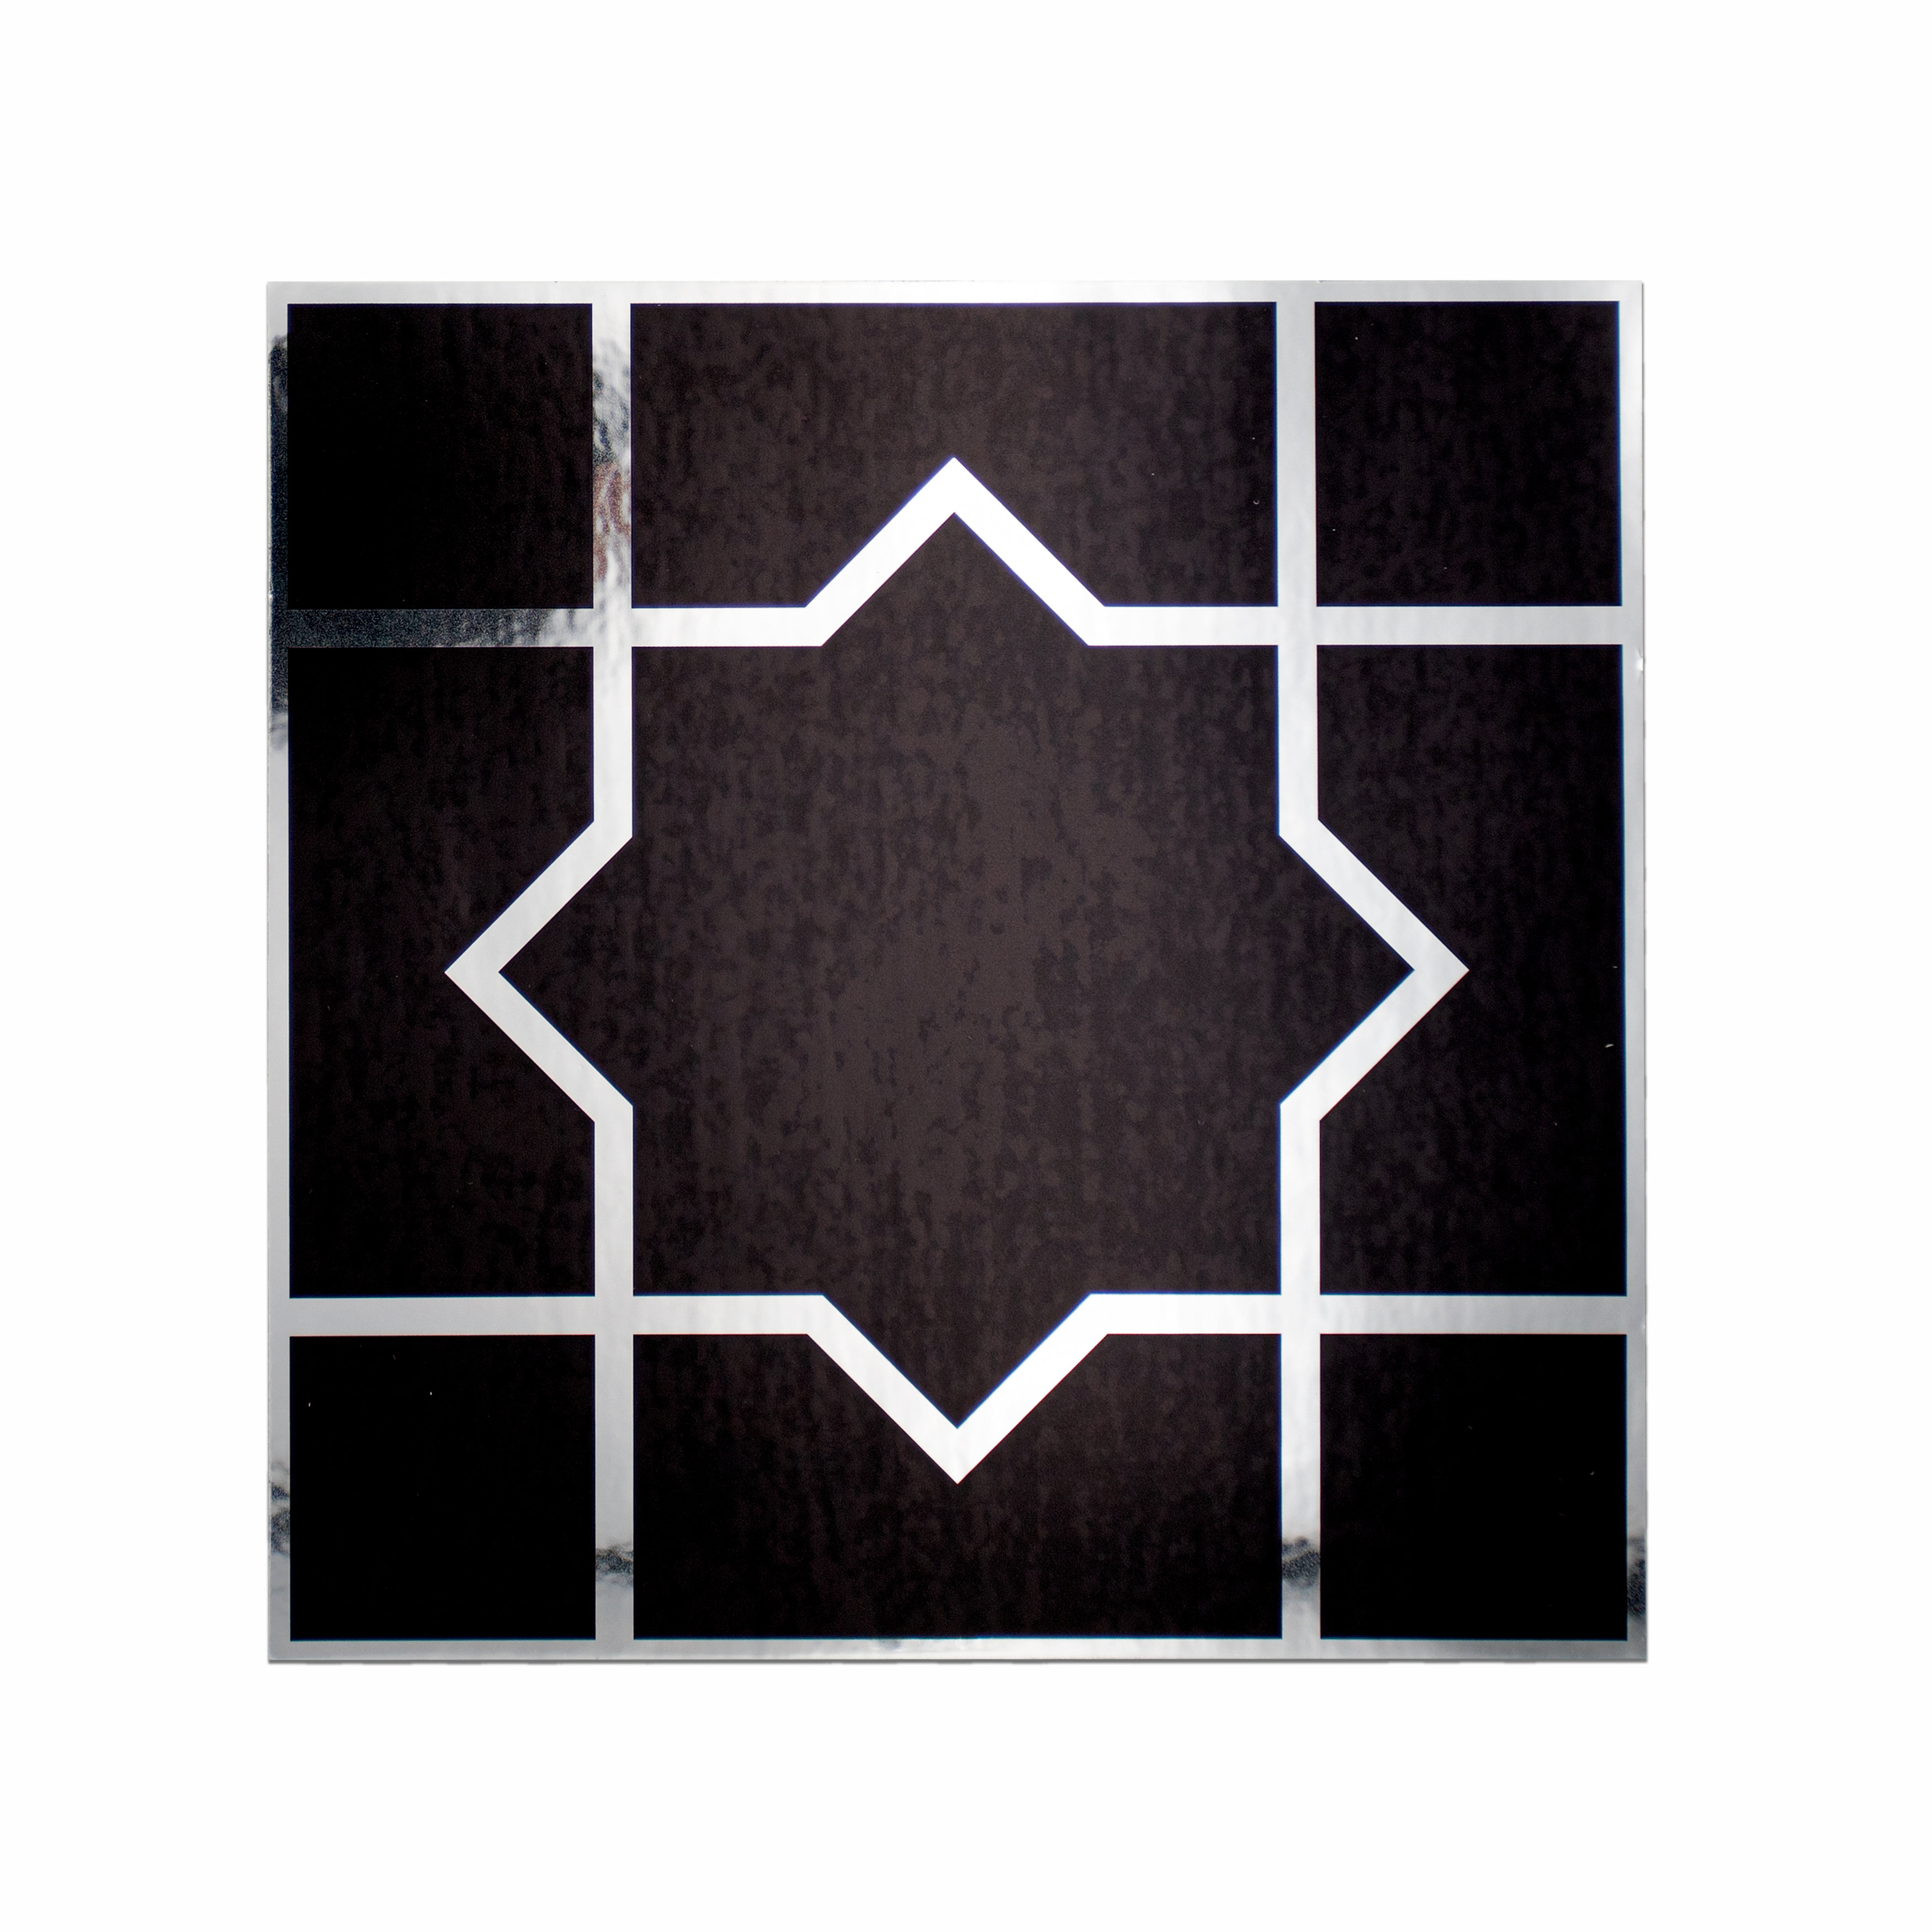 13 x 11.6 inches 4 Tiles, 7mm Thick Black Gold Hexagon Mosaic Kitchen Bathroom Wall Tiles Fabulous Décor: Real Marble Stone and Gold Steel Accents Backsplash Covers Around 4.2sf